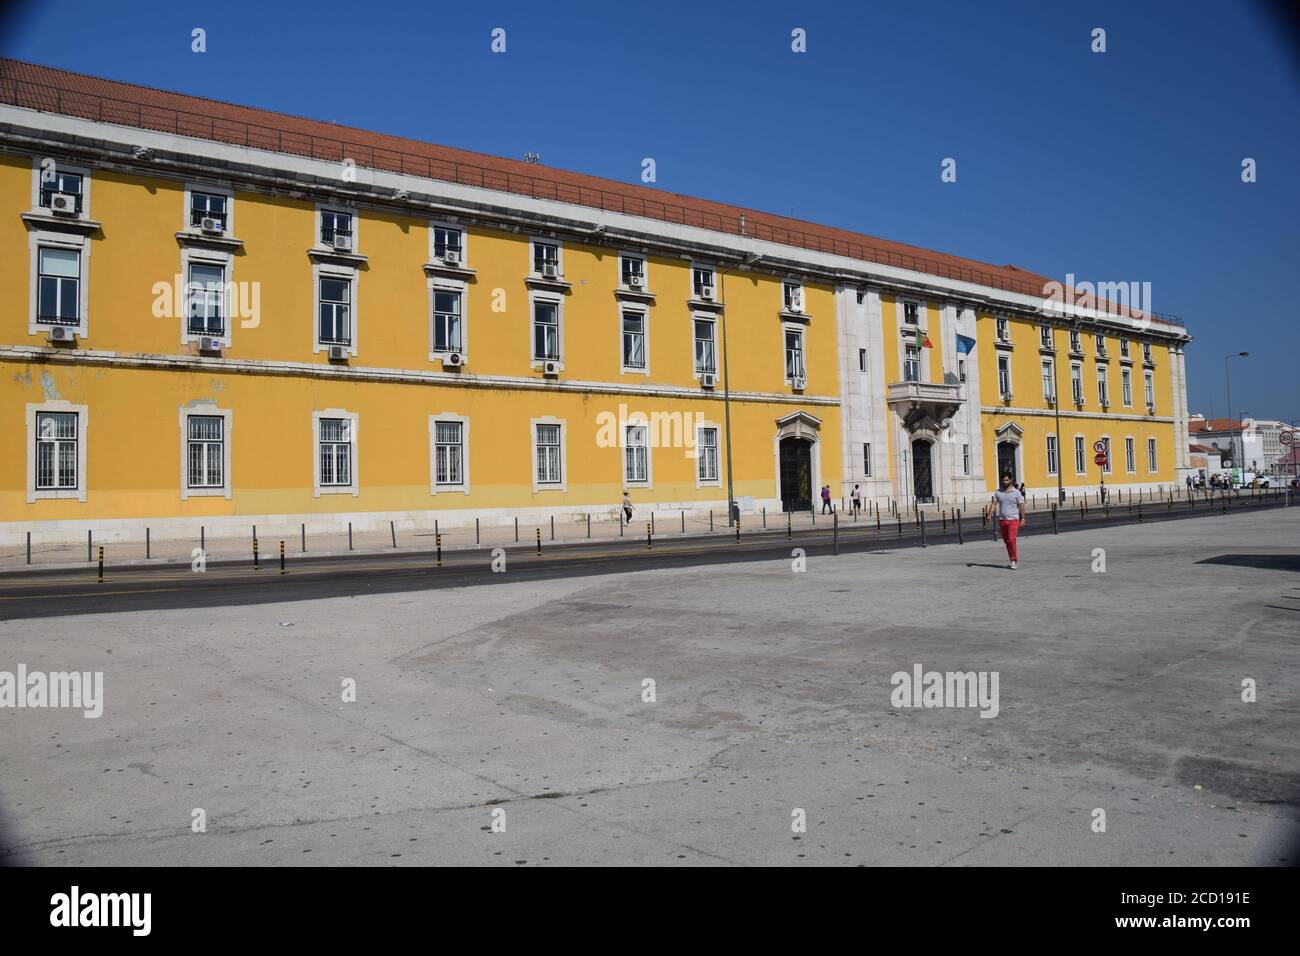 downtown Lisbon capital of Portugal historical buildings old Portuguese arquitecture Stock Photo